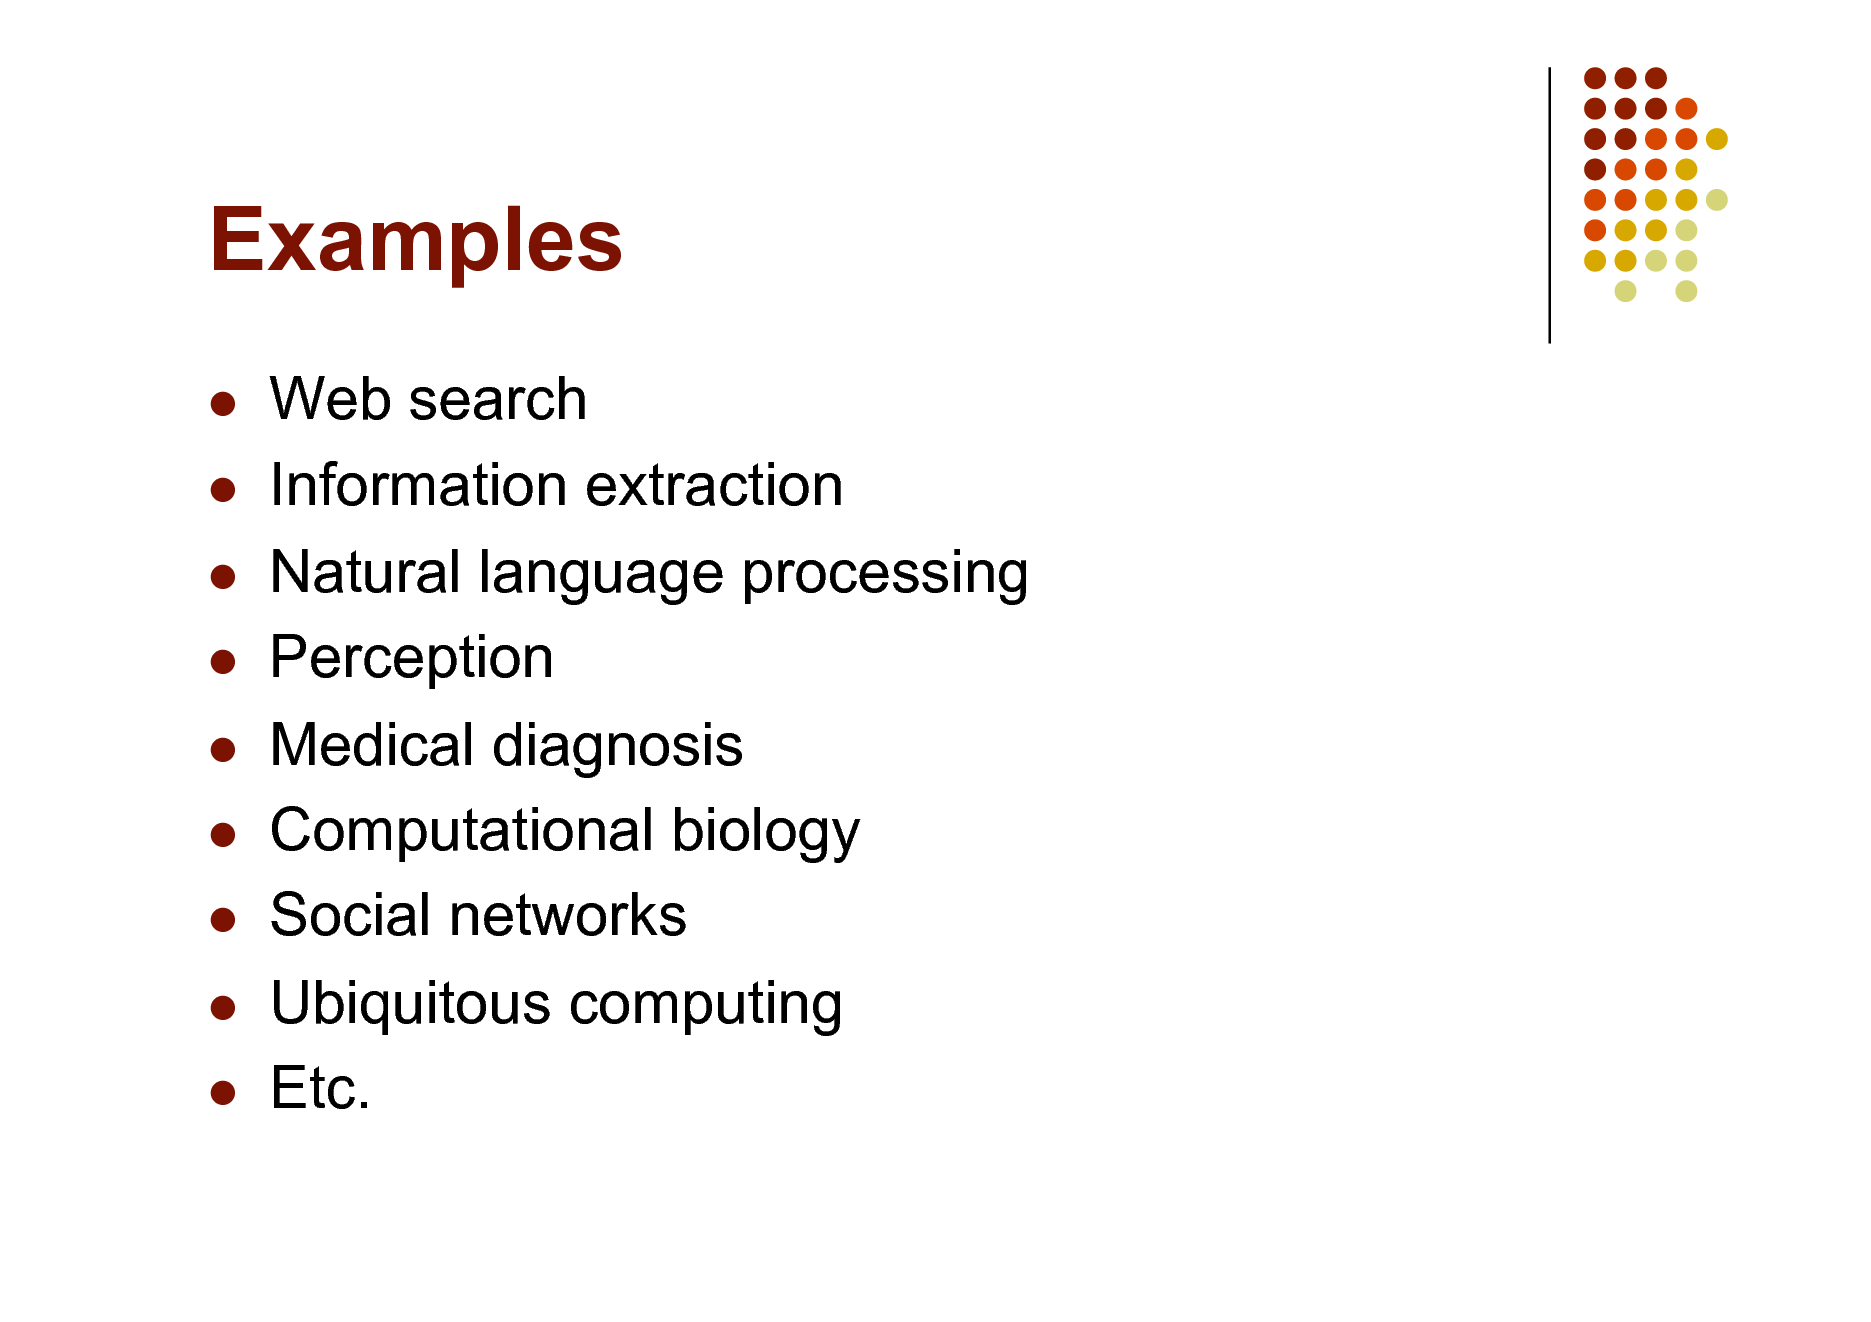 Slide: Examples
        

Web search Information extraction Natural language processing Perception Medical diagnosis Computational biology Social networks Ubiquitous computing Etc.

